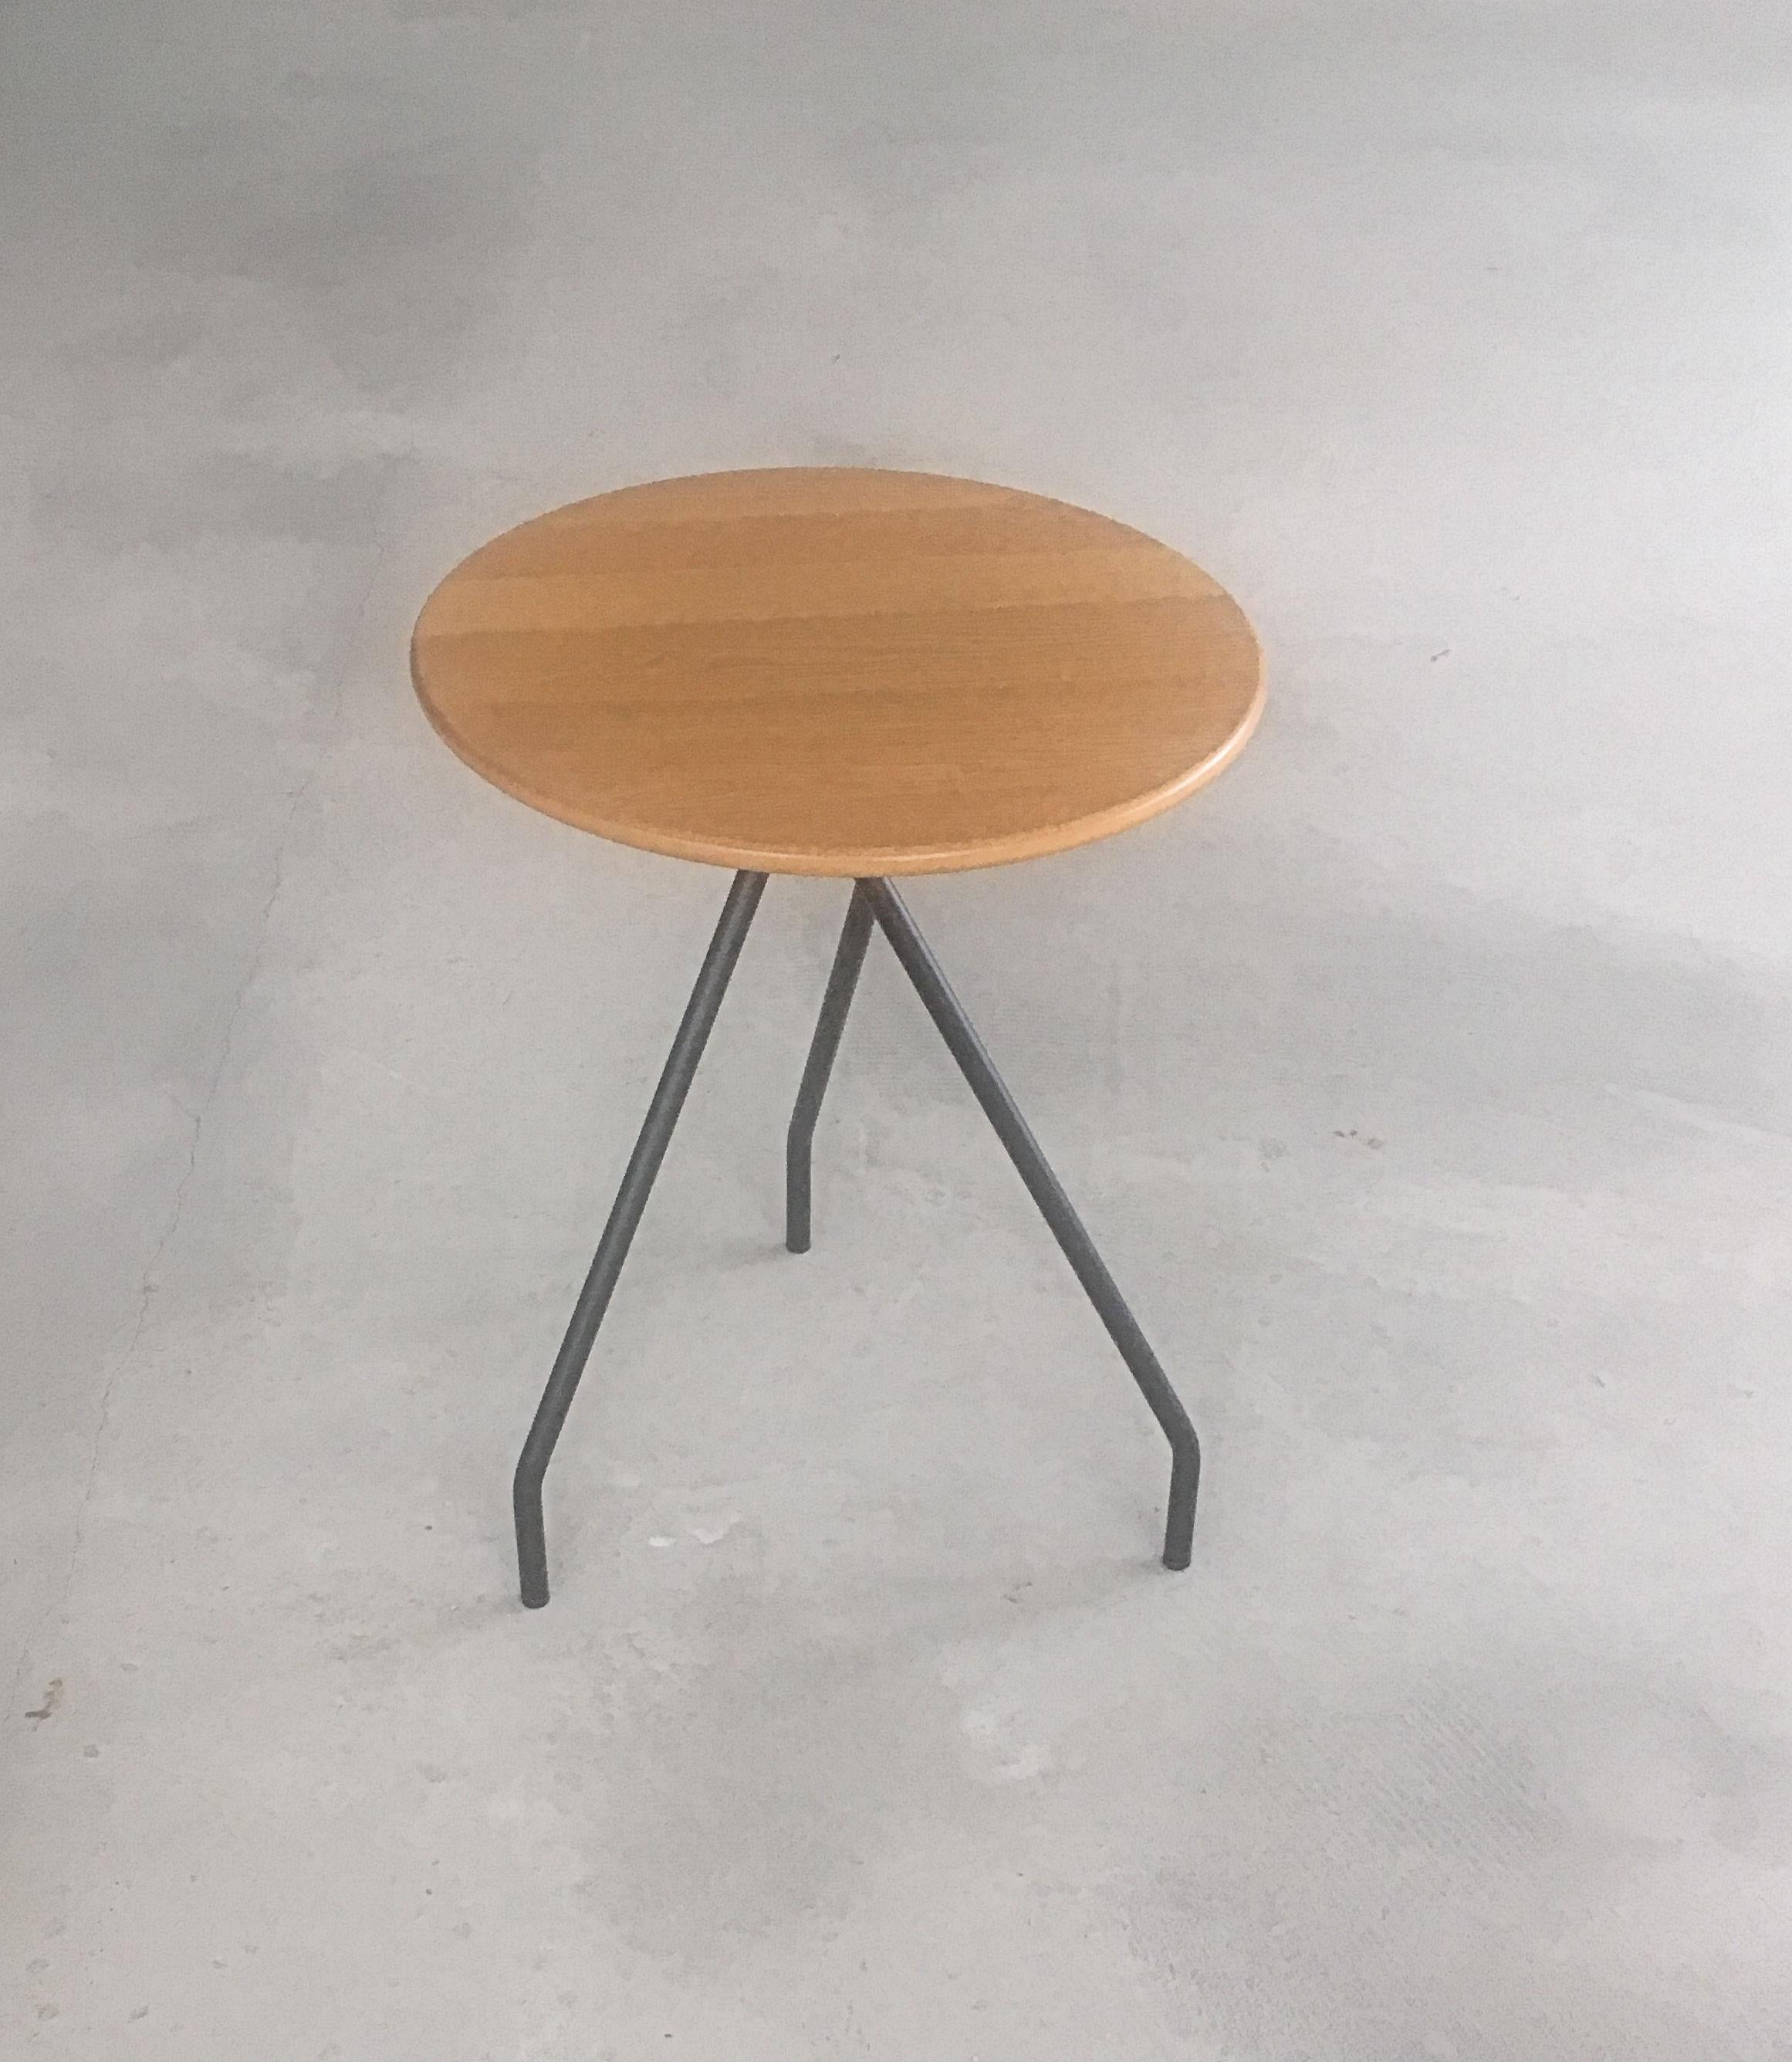 Danish Rud Thygesen and Johnny Sørensen oak side table by Magnus Olsen.

The circular and very handy side table is in very good condition with only small signs of age and use.

   